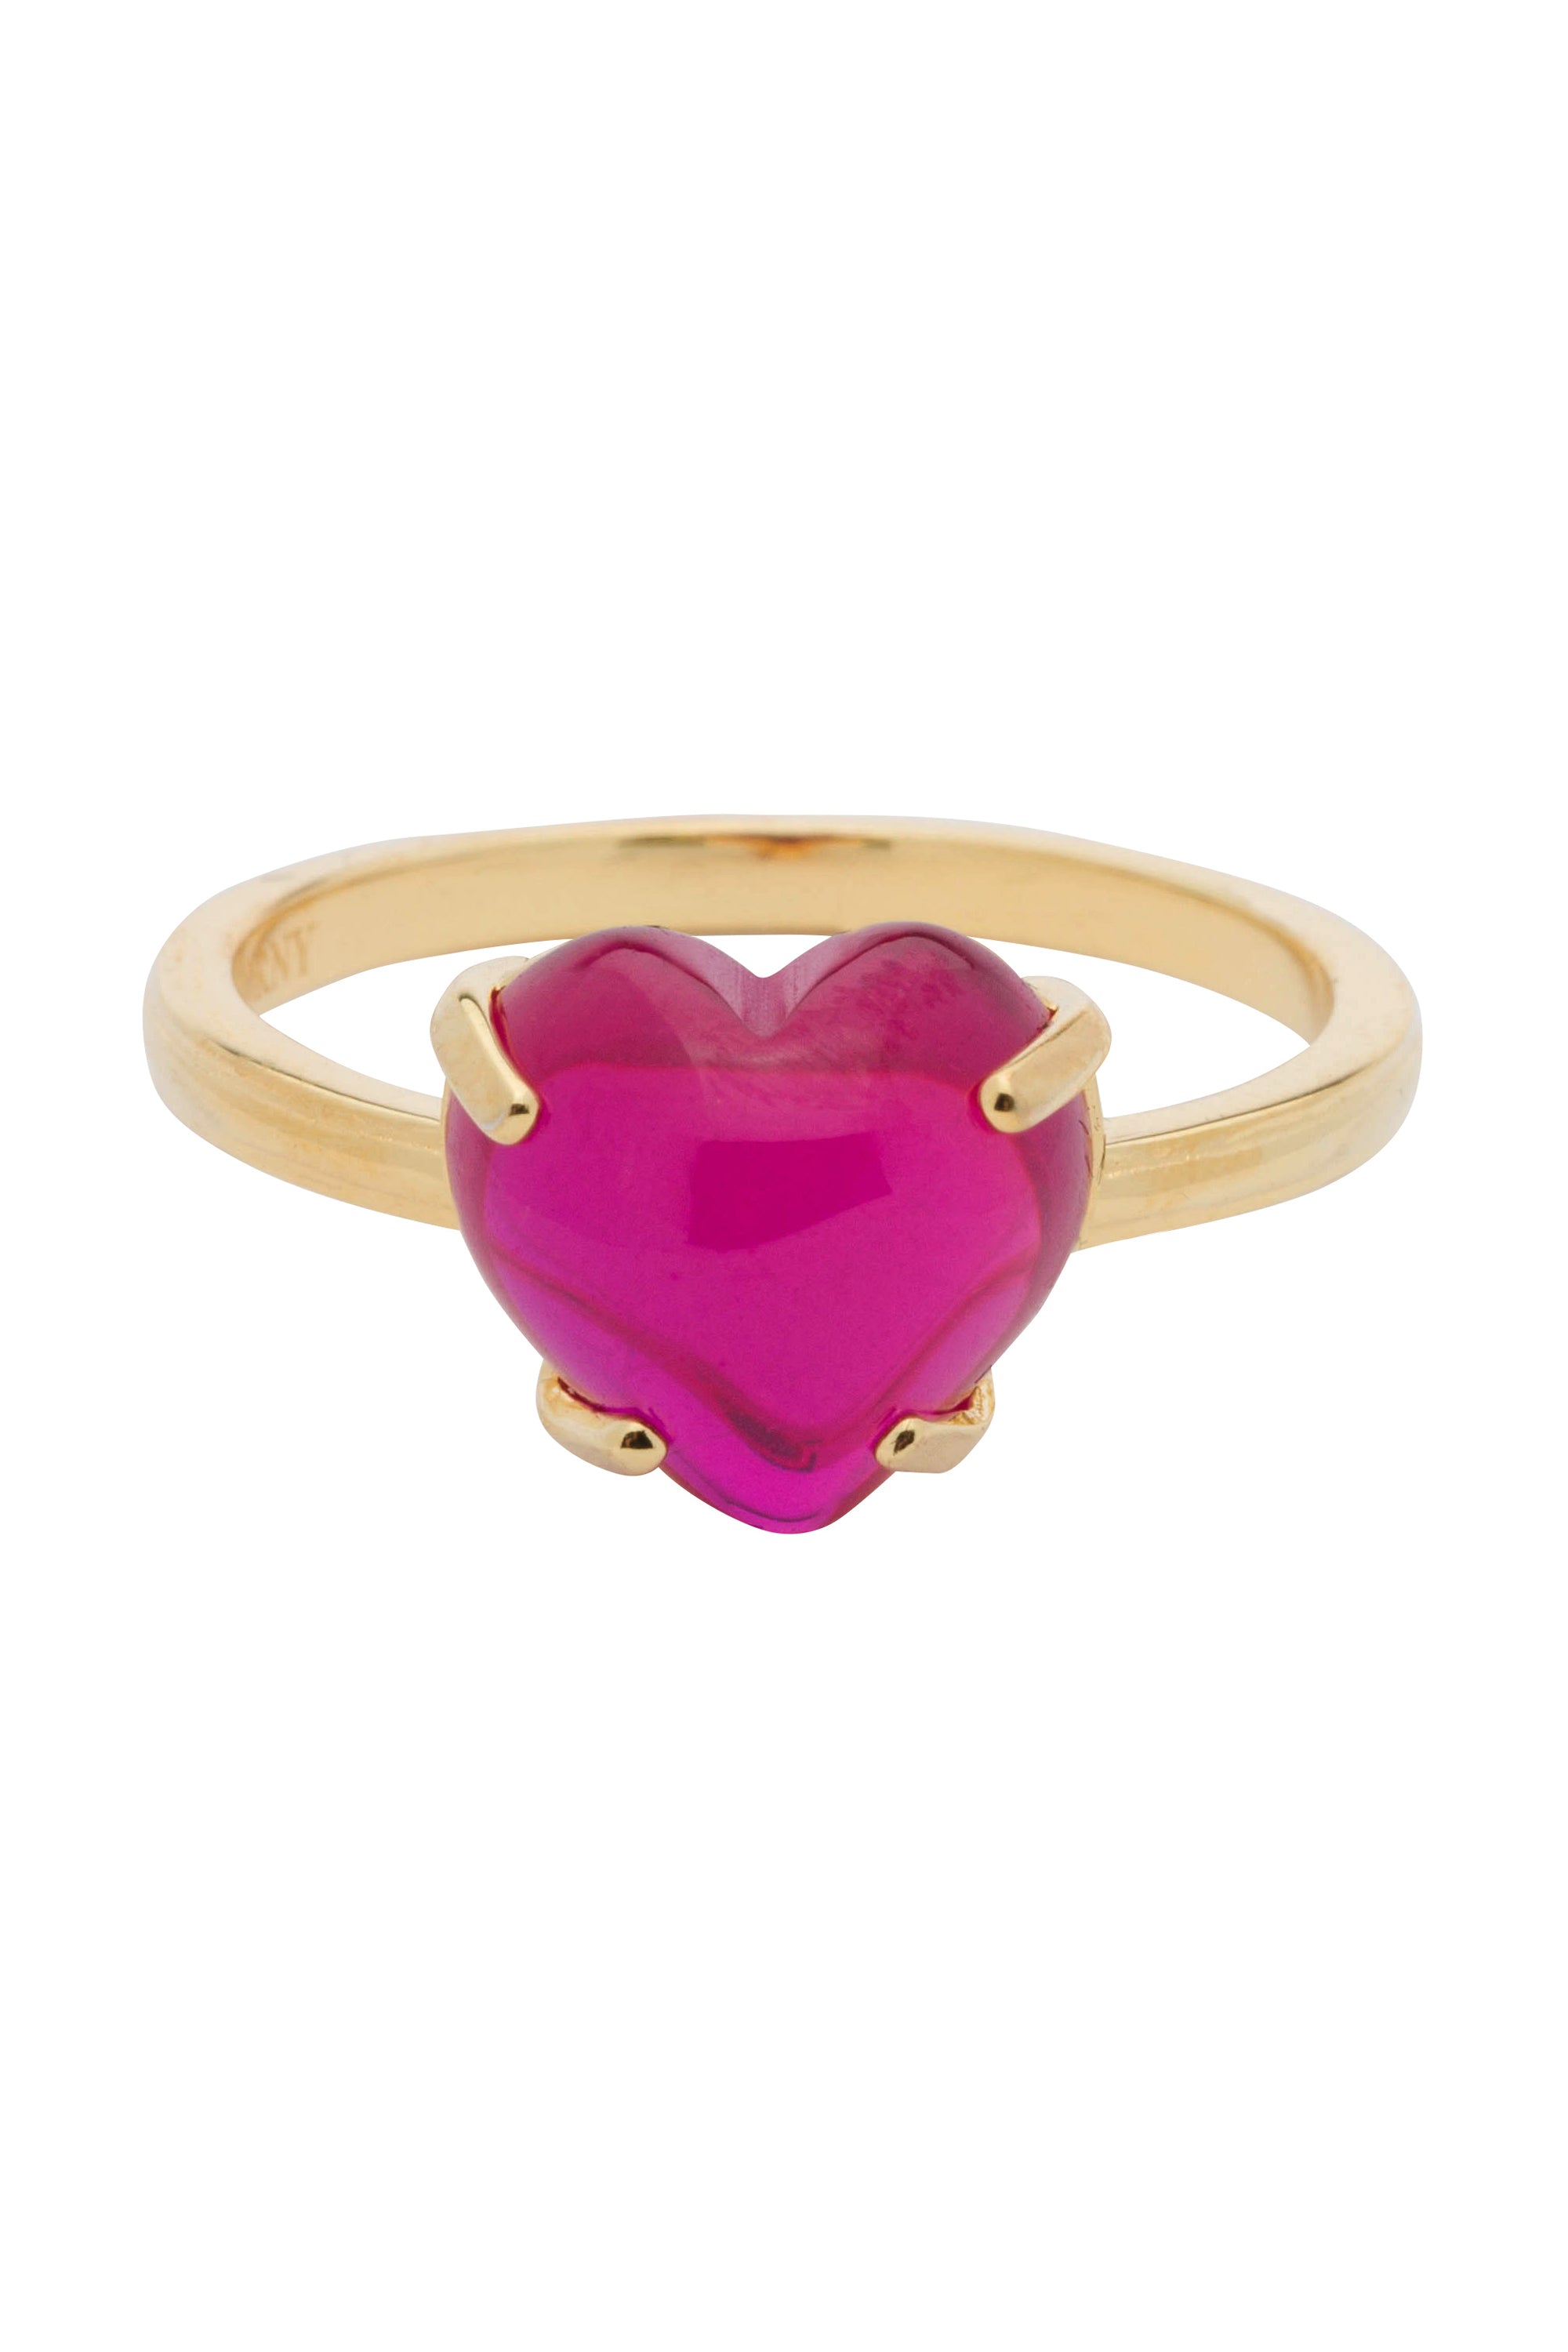 14K Gold Filled Horny Ruby Ring